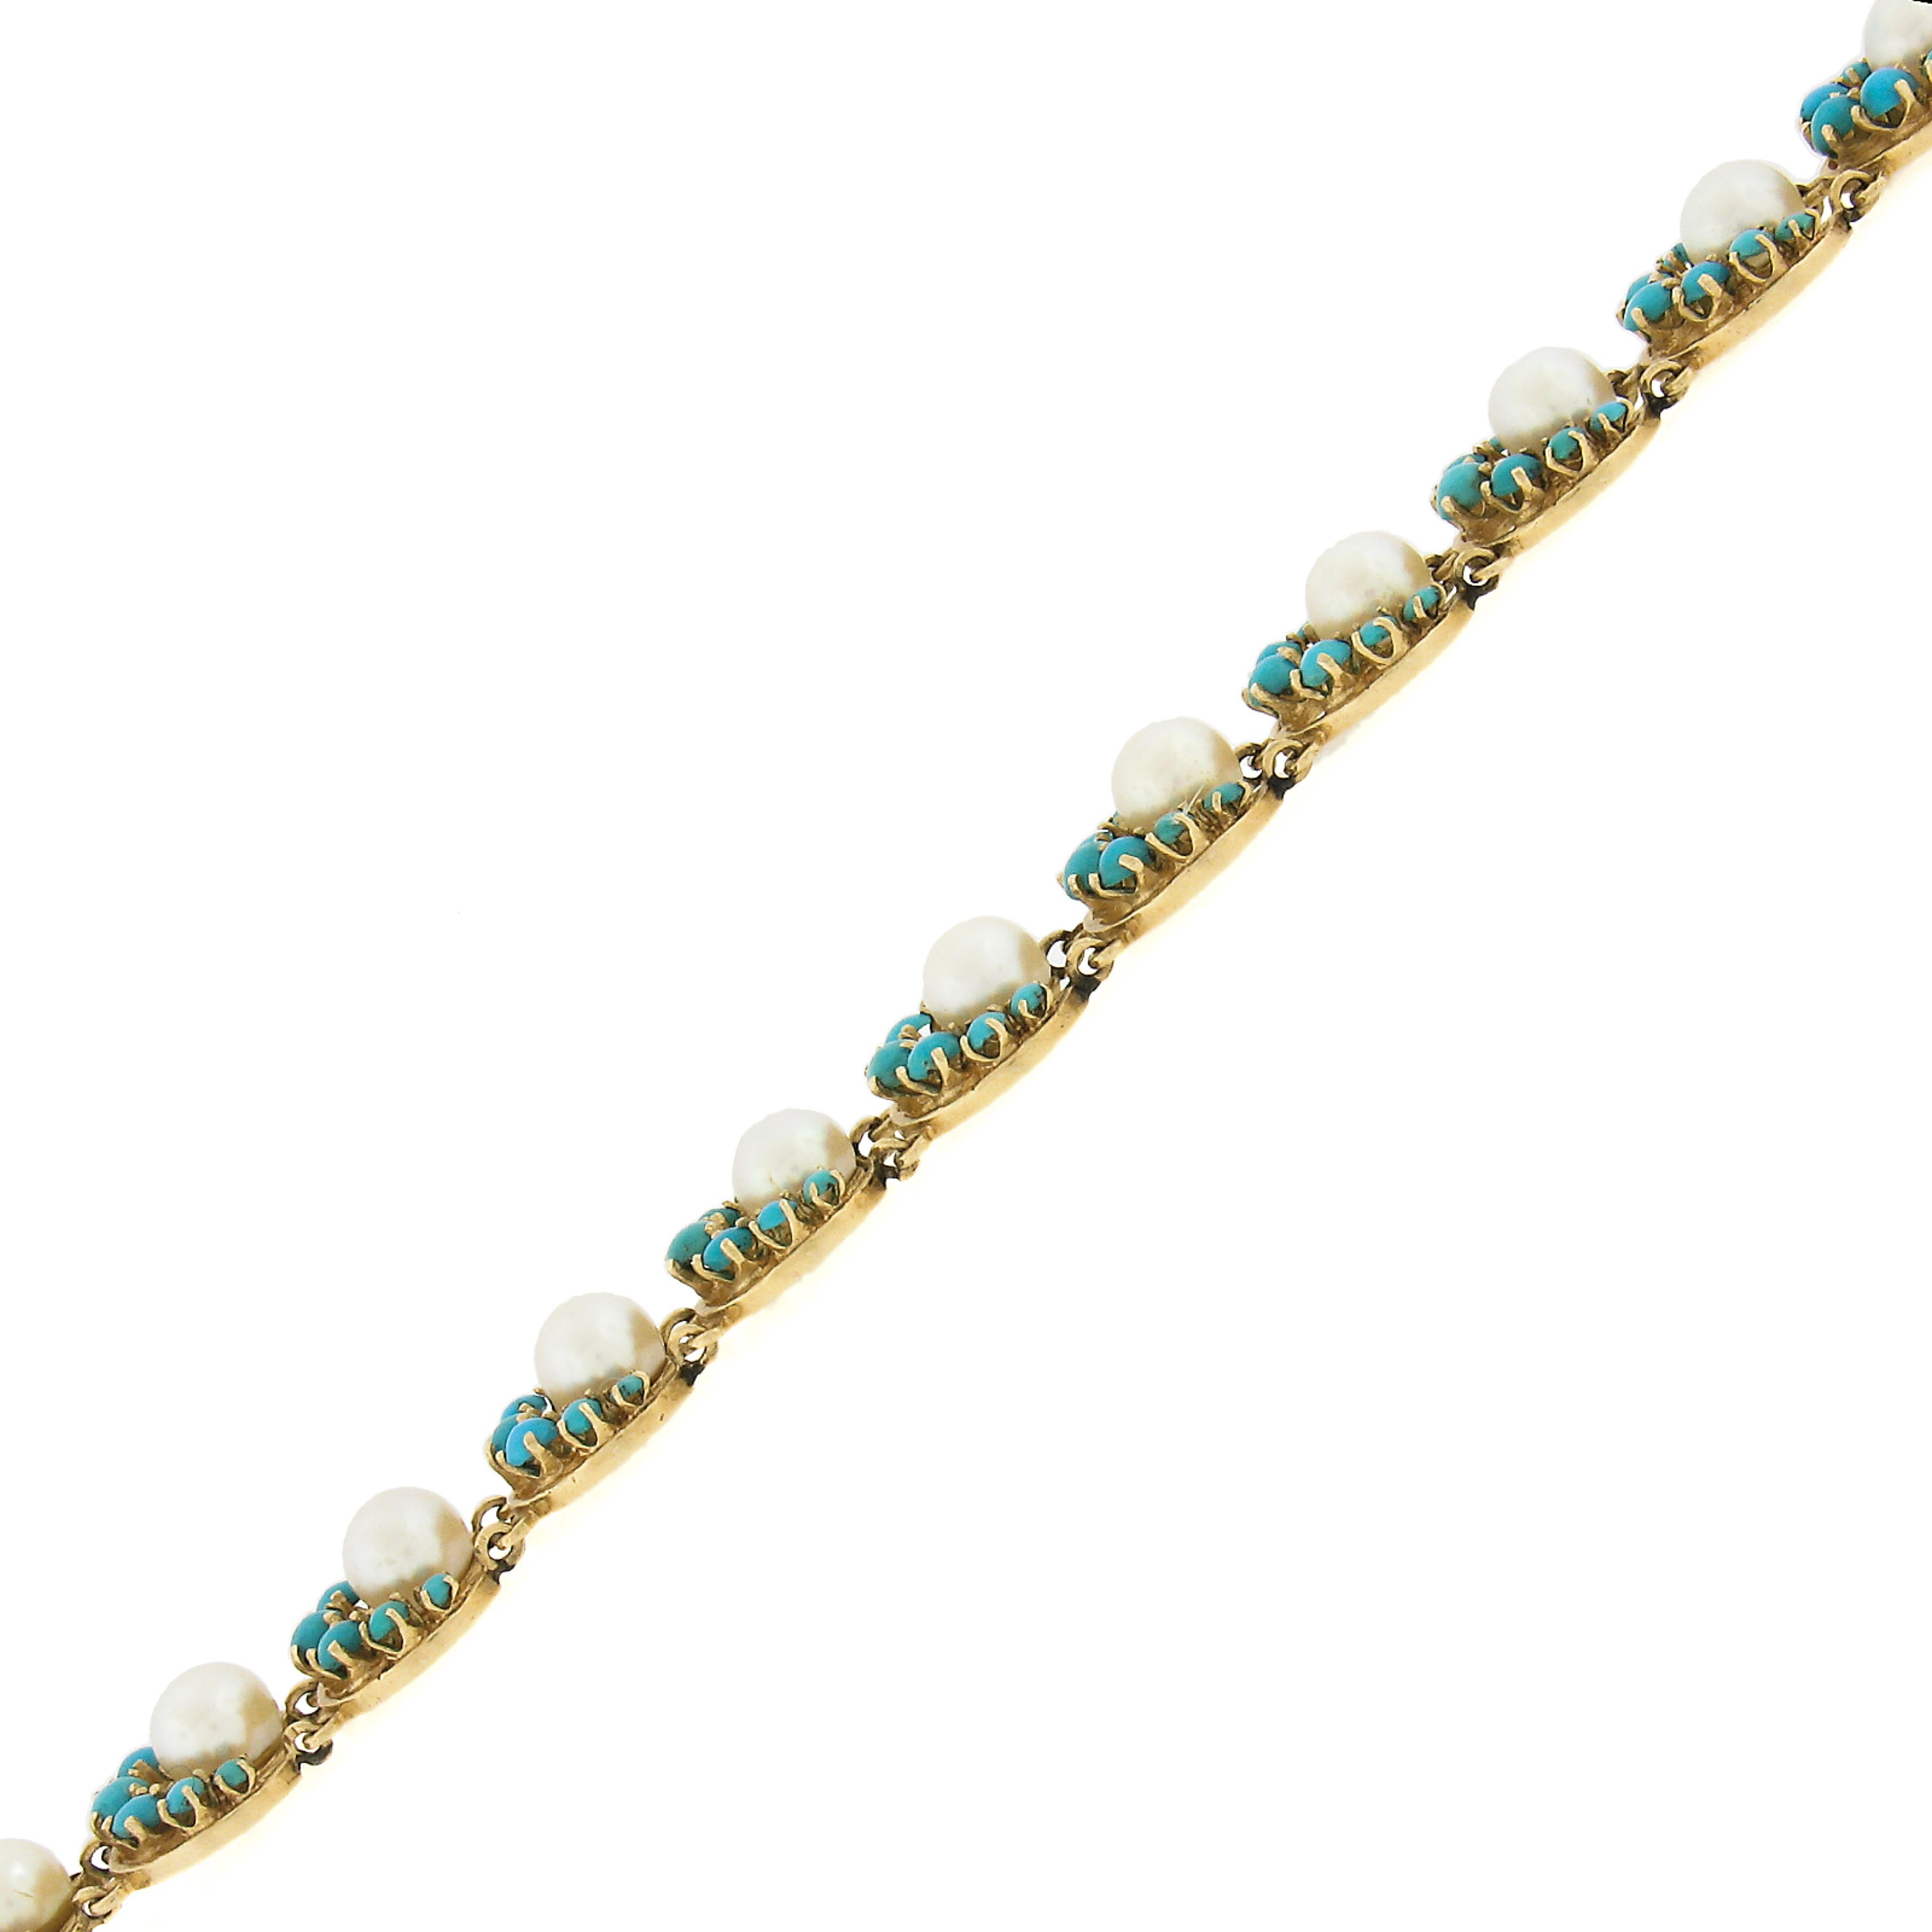 Vintage 14K Yellow Gold Pearls & Turquoise Horseshoe or Crescent Link Bracelet For Sale 3